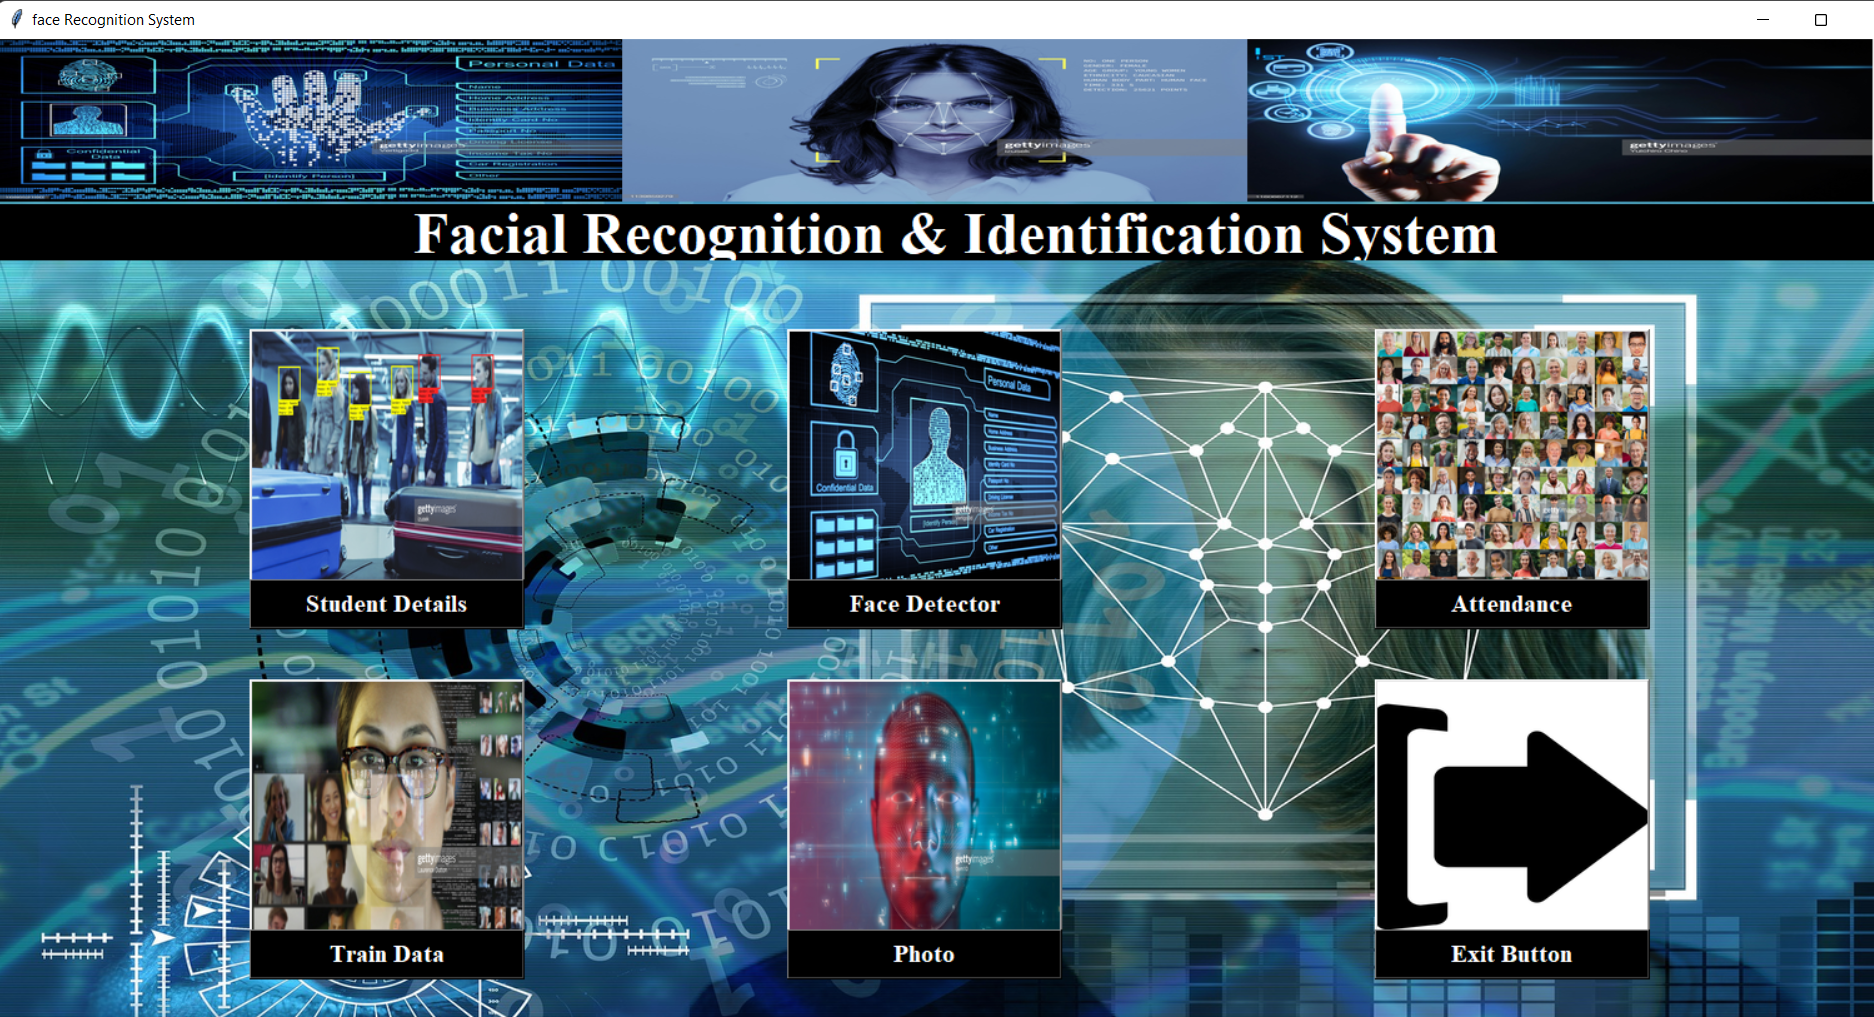 Facial recognition and identification